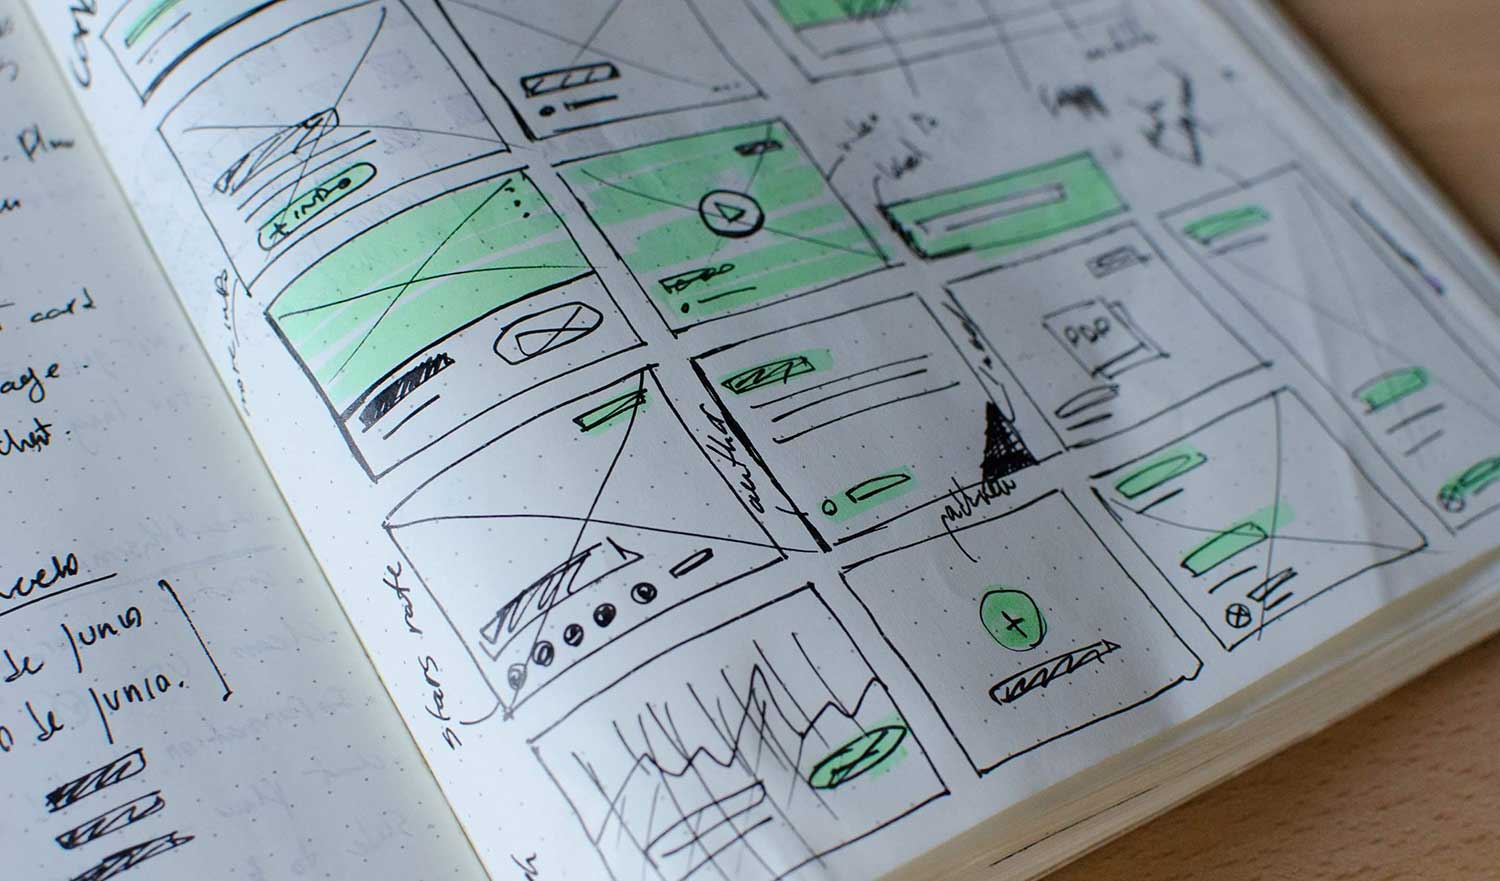 Sketch book with user experience drawings for web application